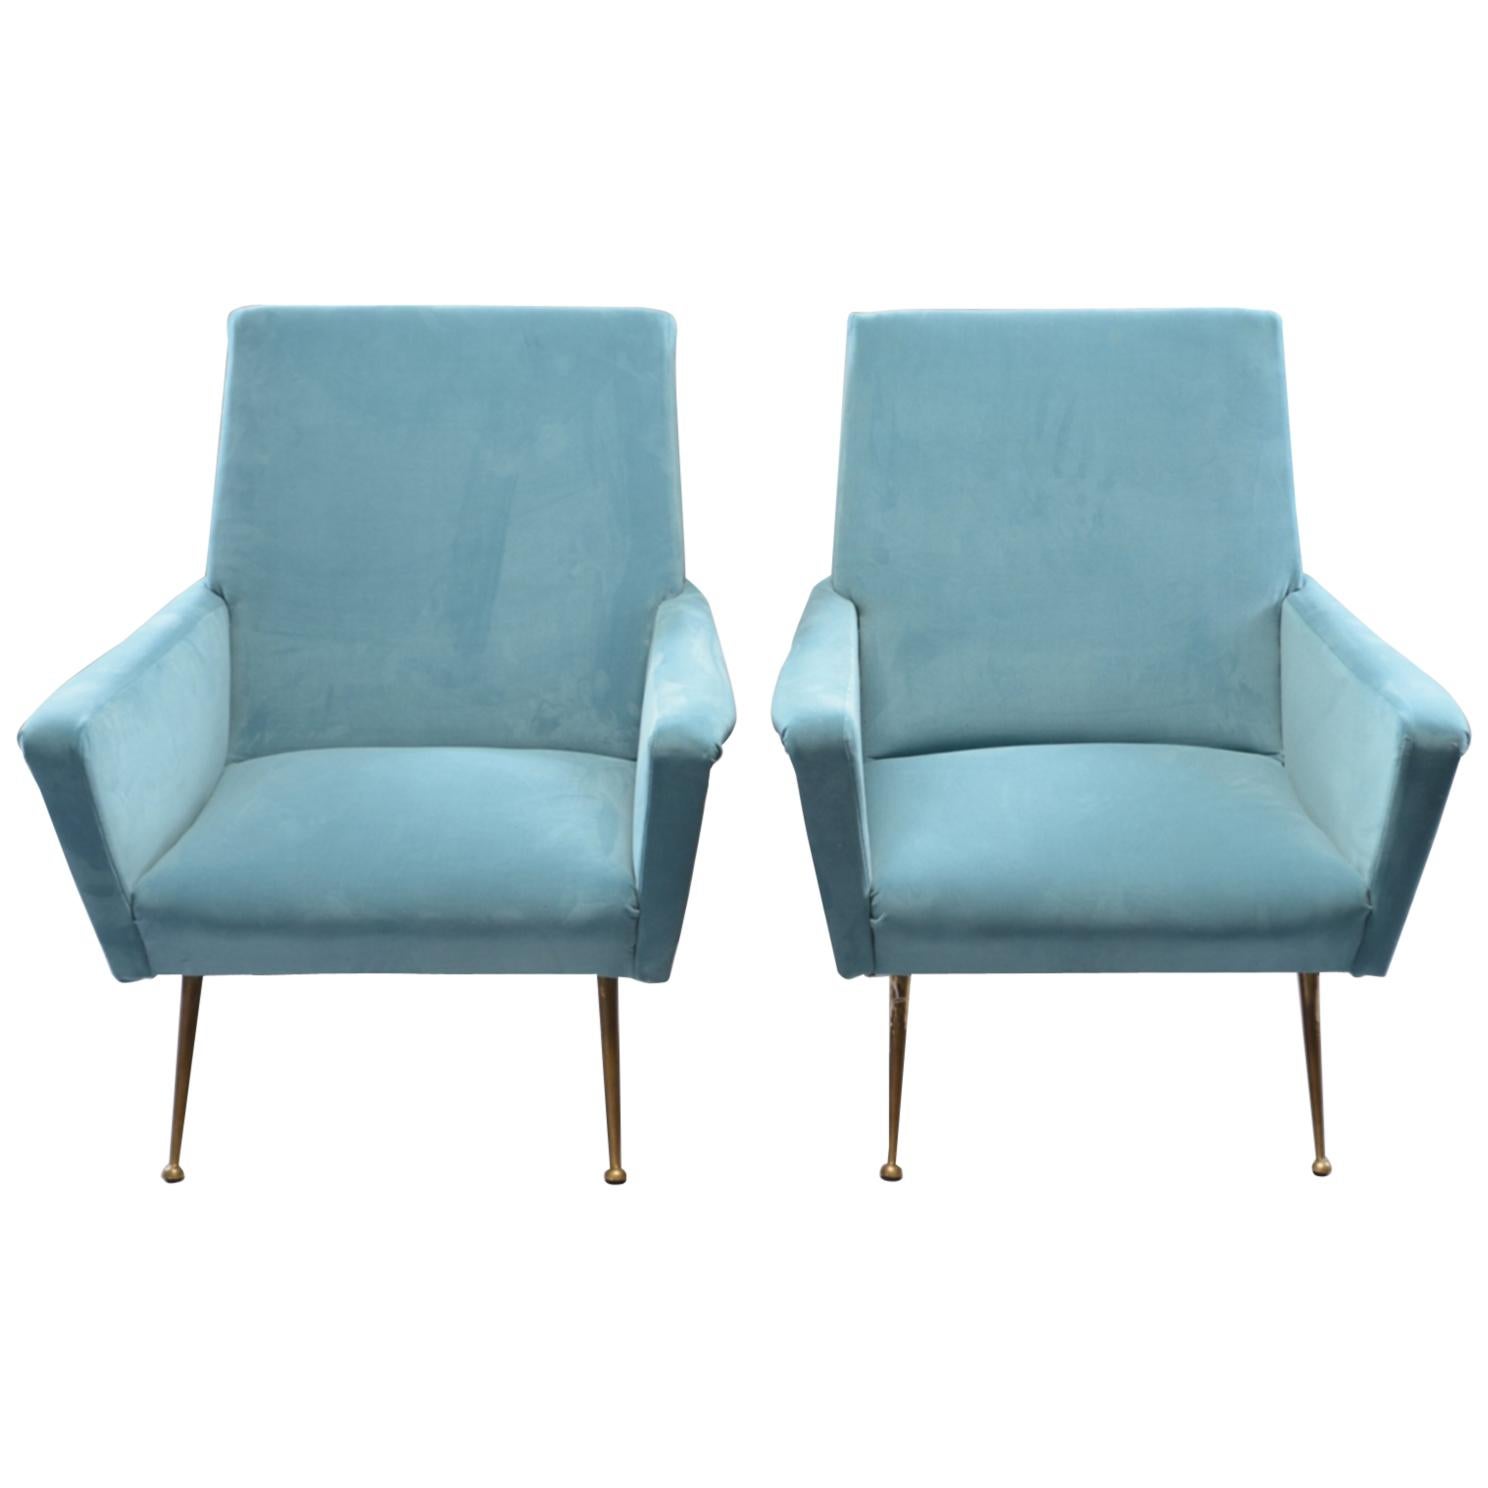 Pair of Midcentury Italian Armchairs with New Upholstery